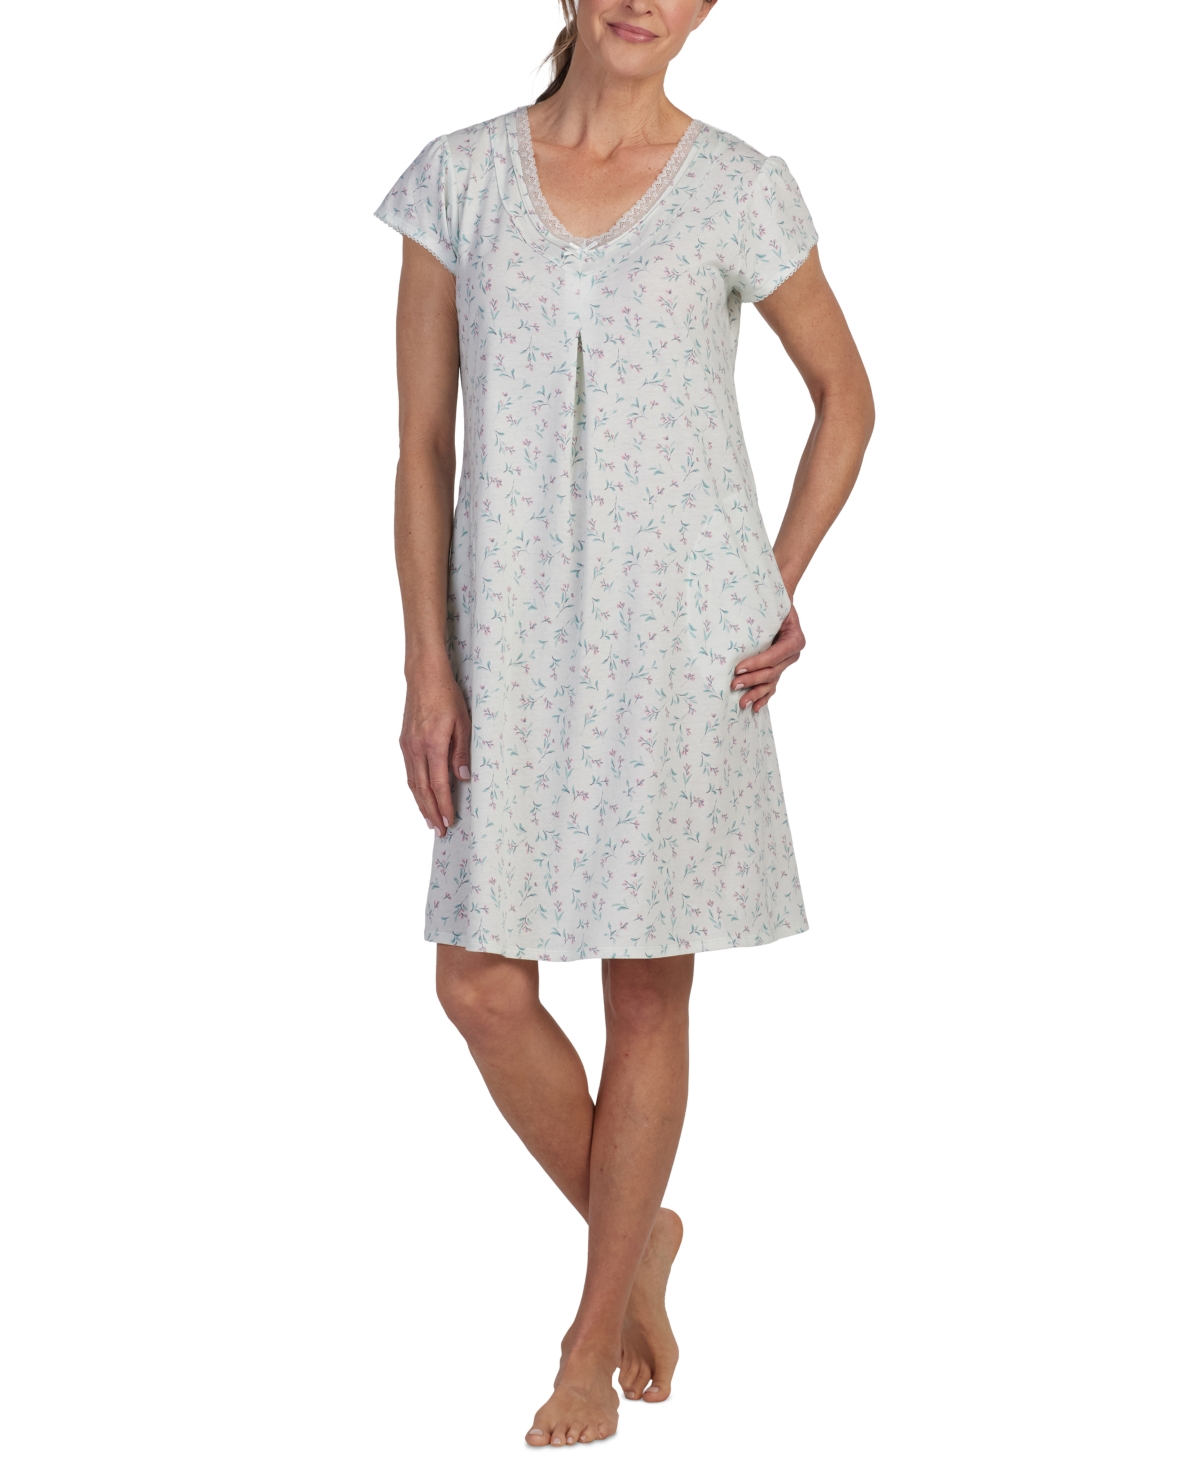 Women's Floral Lace-Trim Nightgown - Sprigs